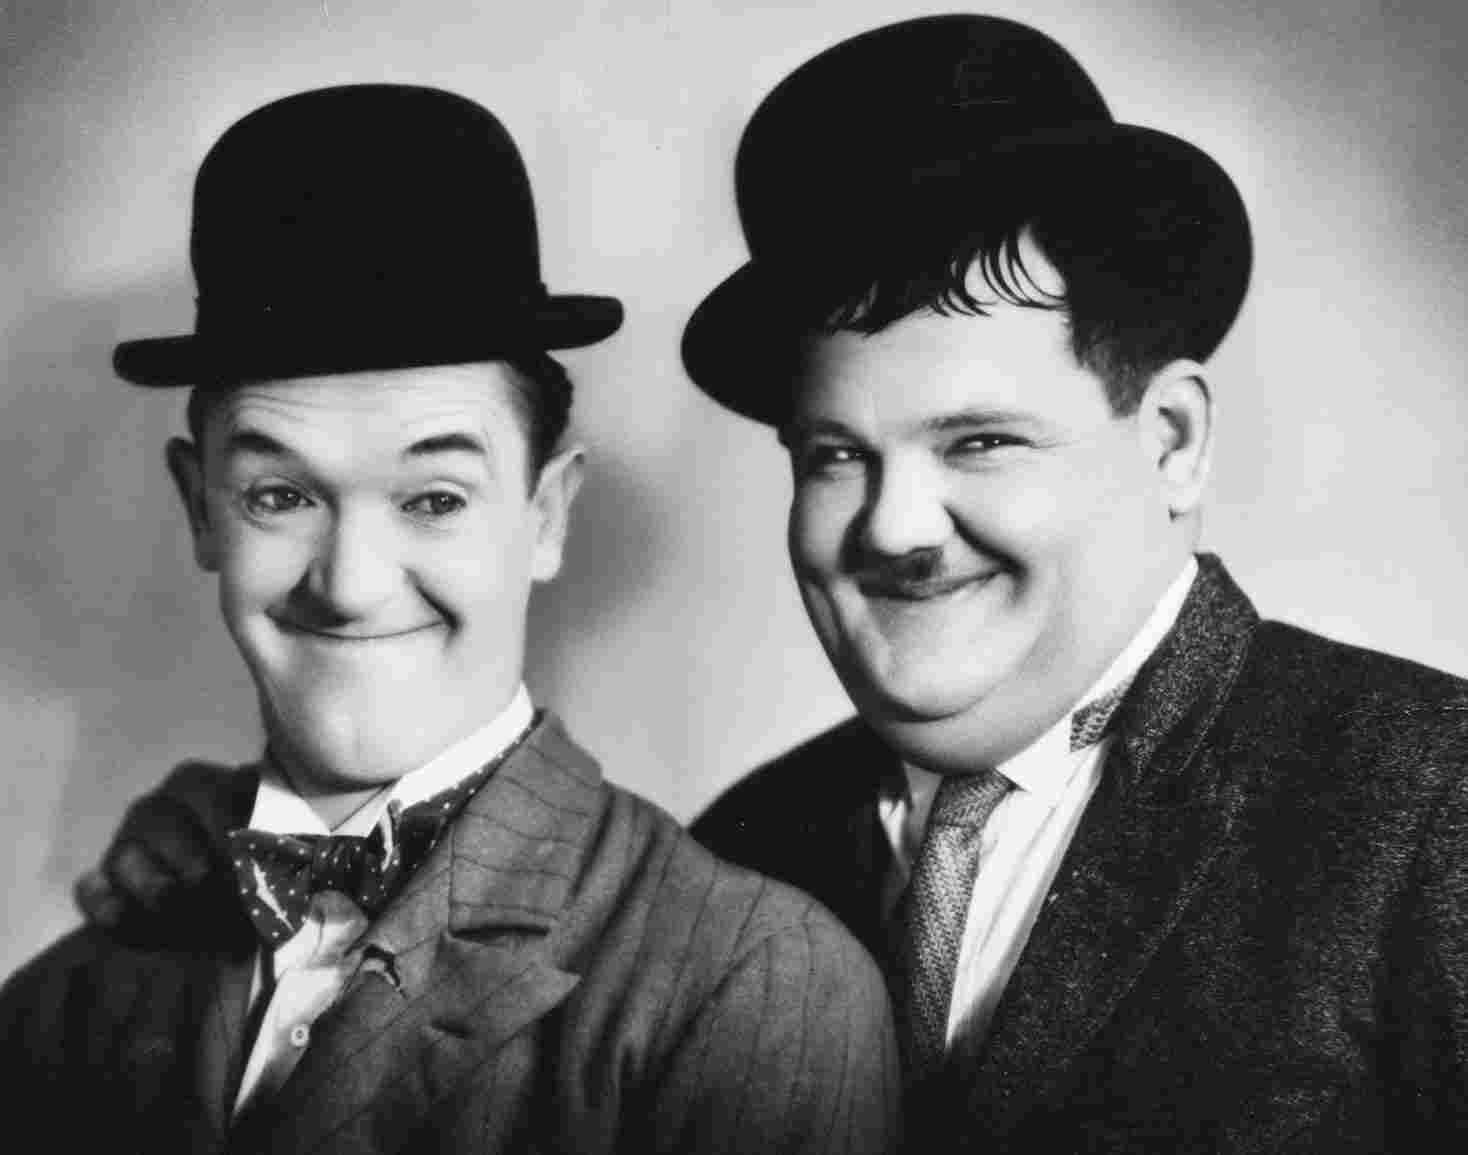 Fun facts about Laurel and Hardy